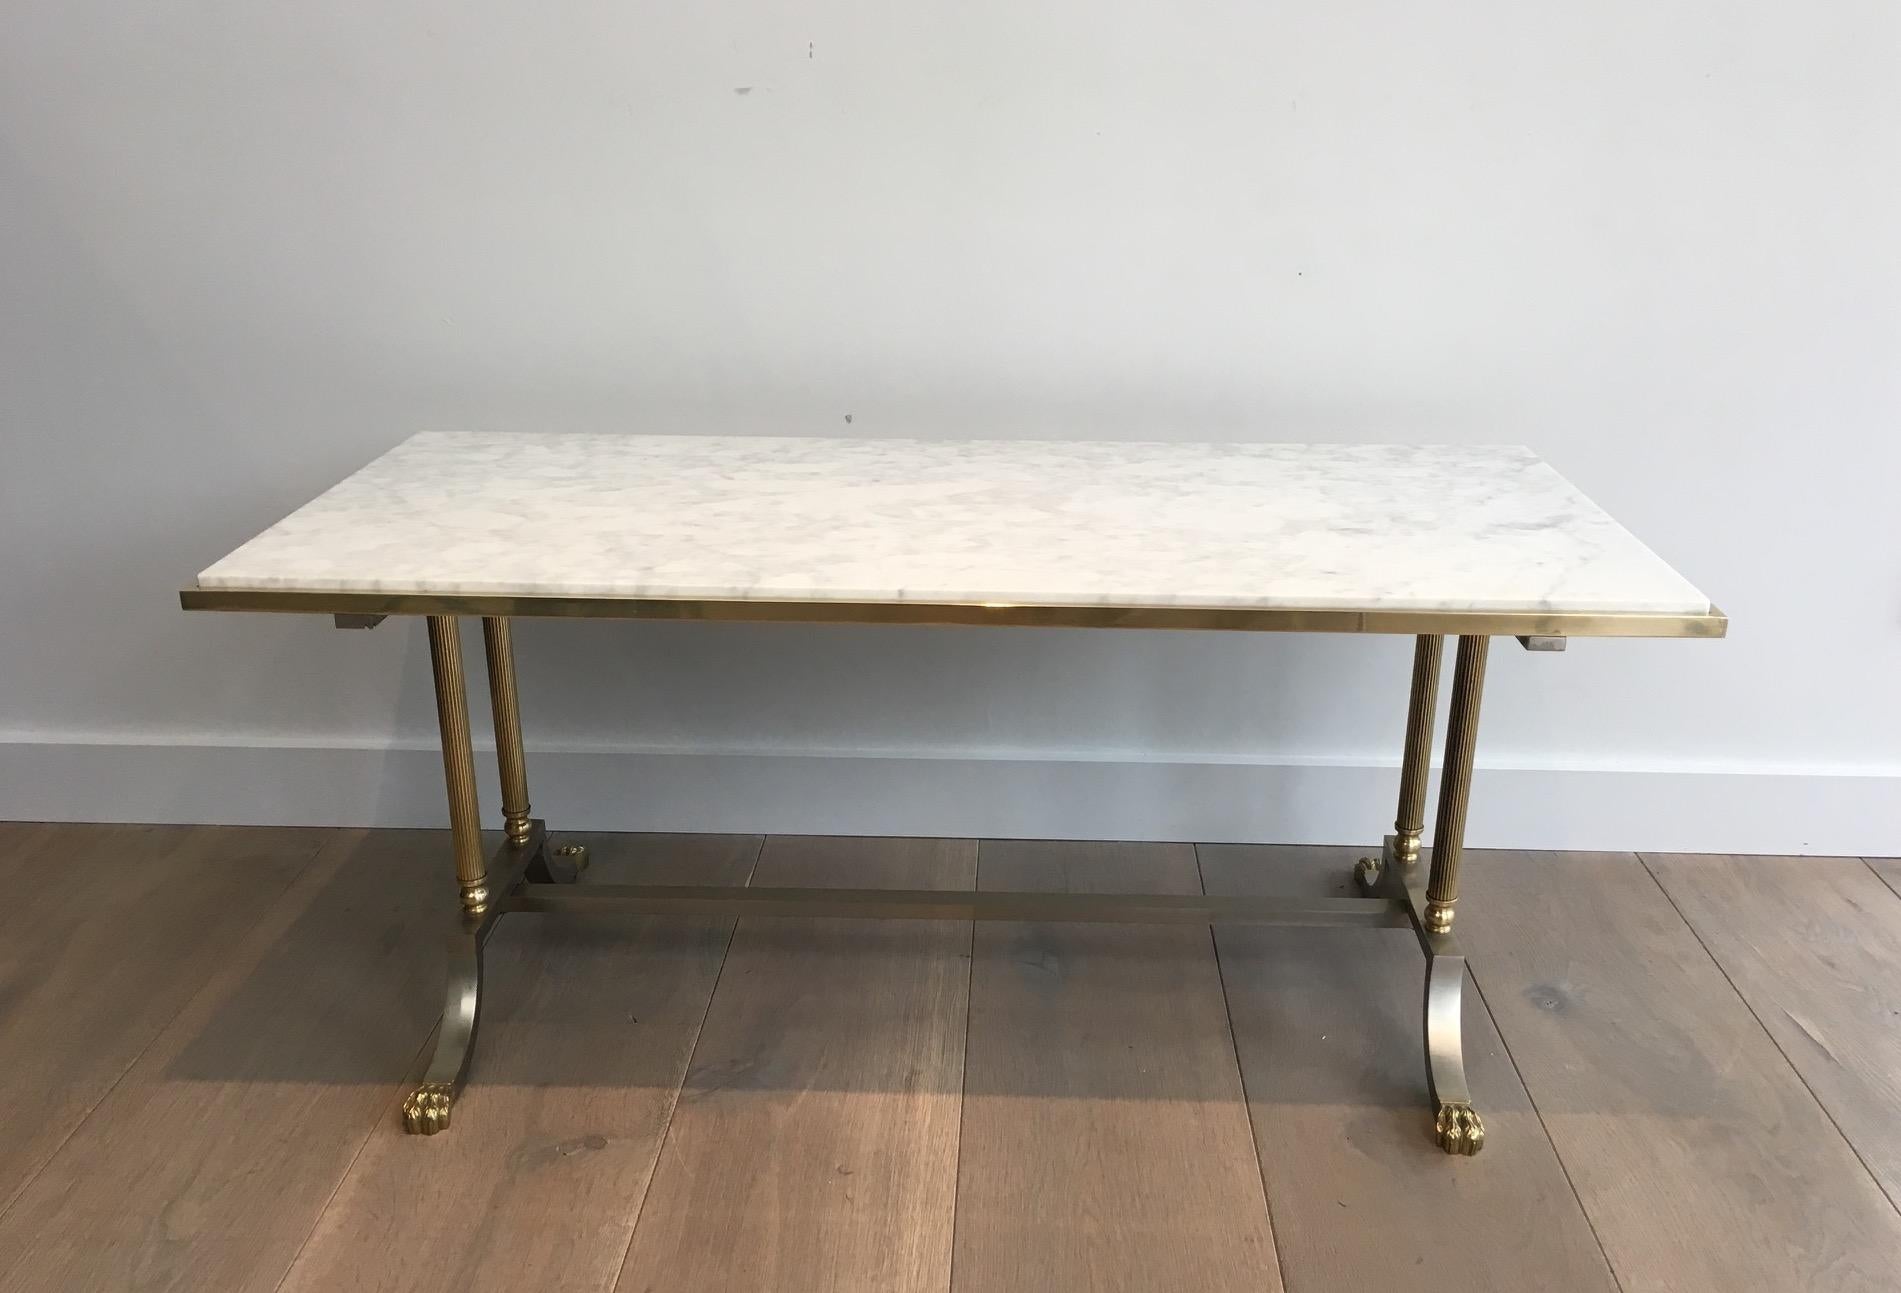 Neoclassical Brushed Steel and Brass Lion Feet Coffee Table with White Marble Top, circa 1940